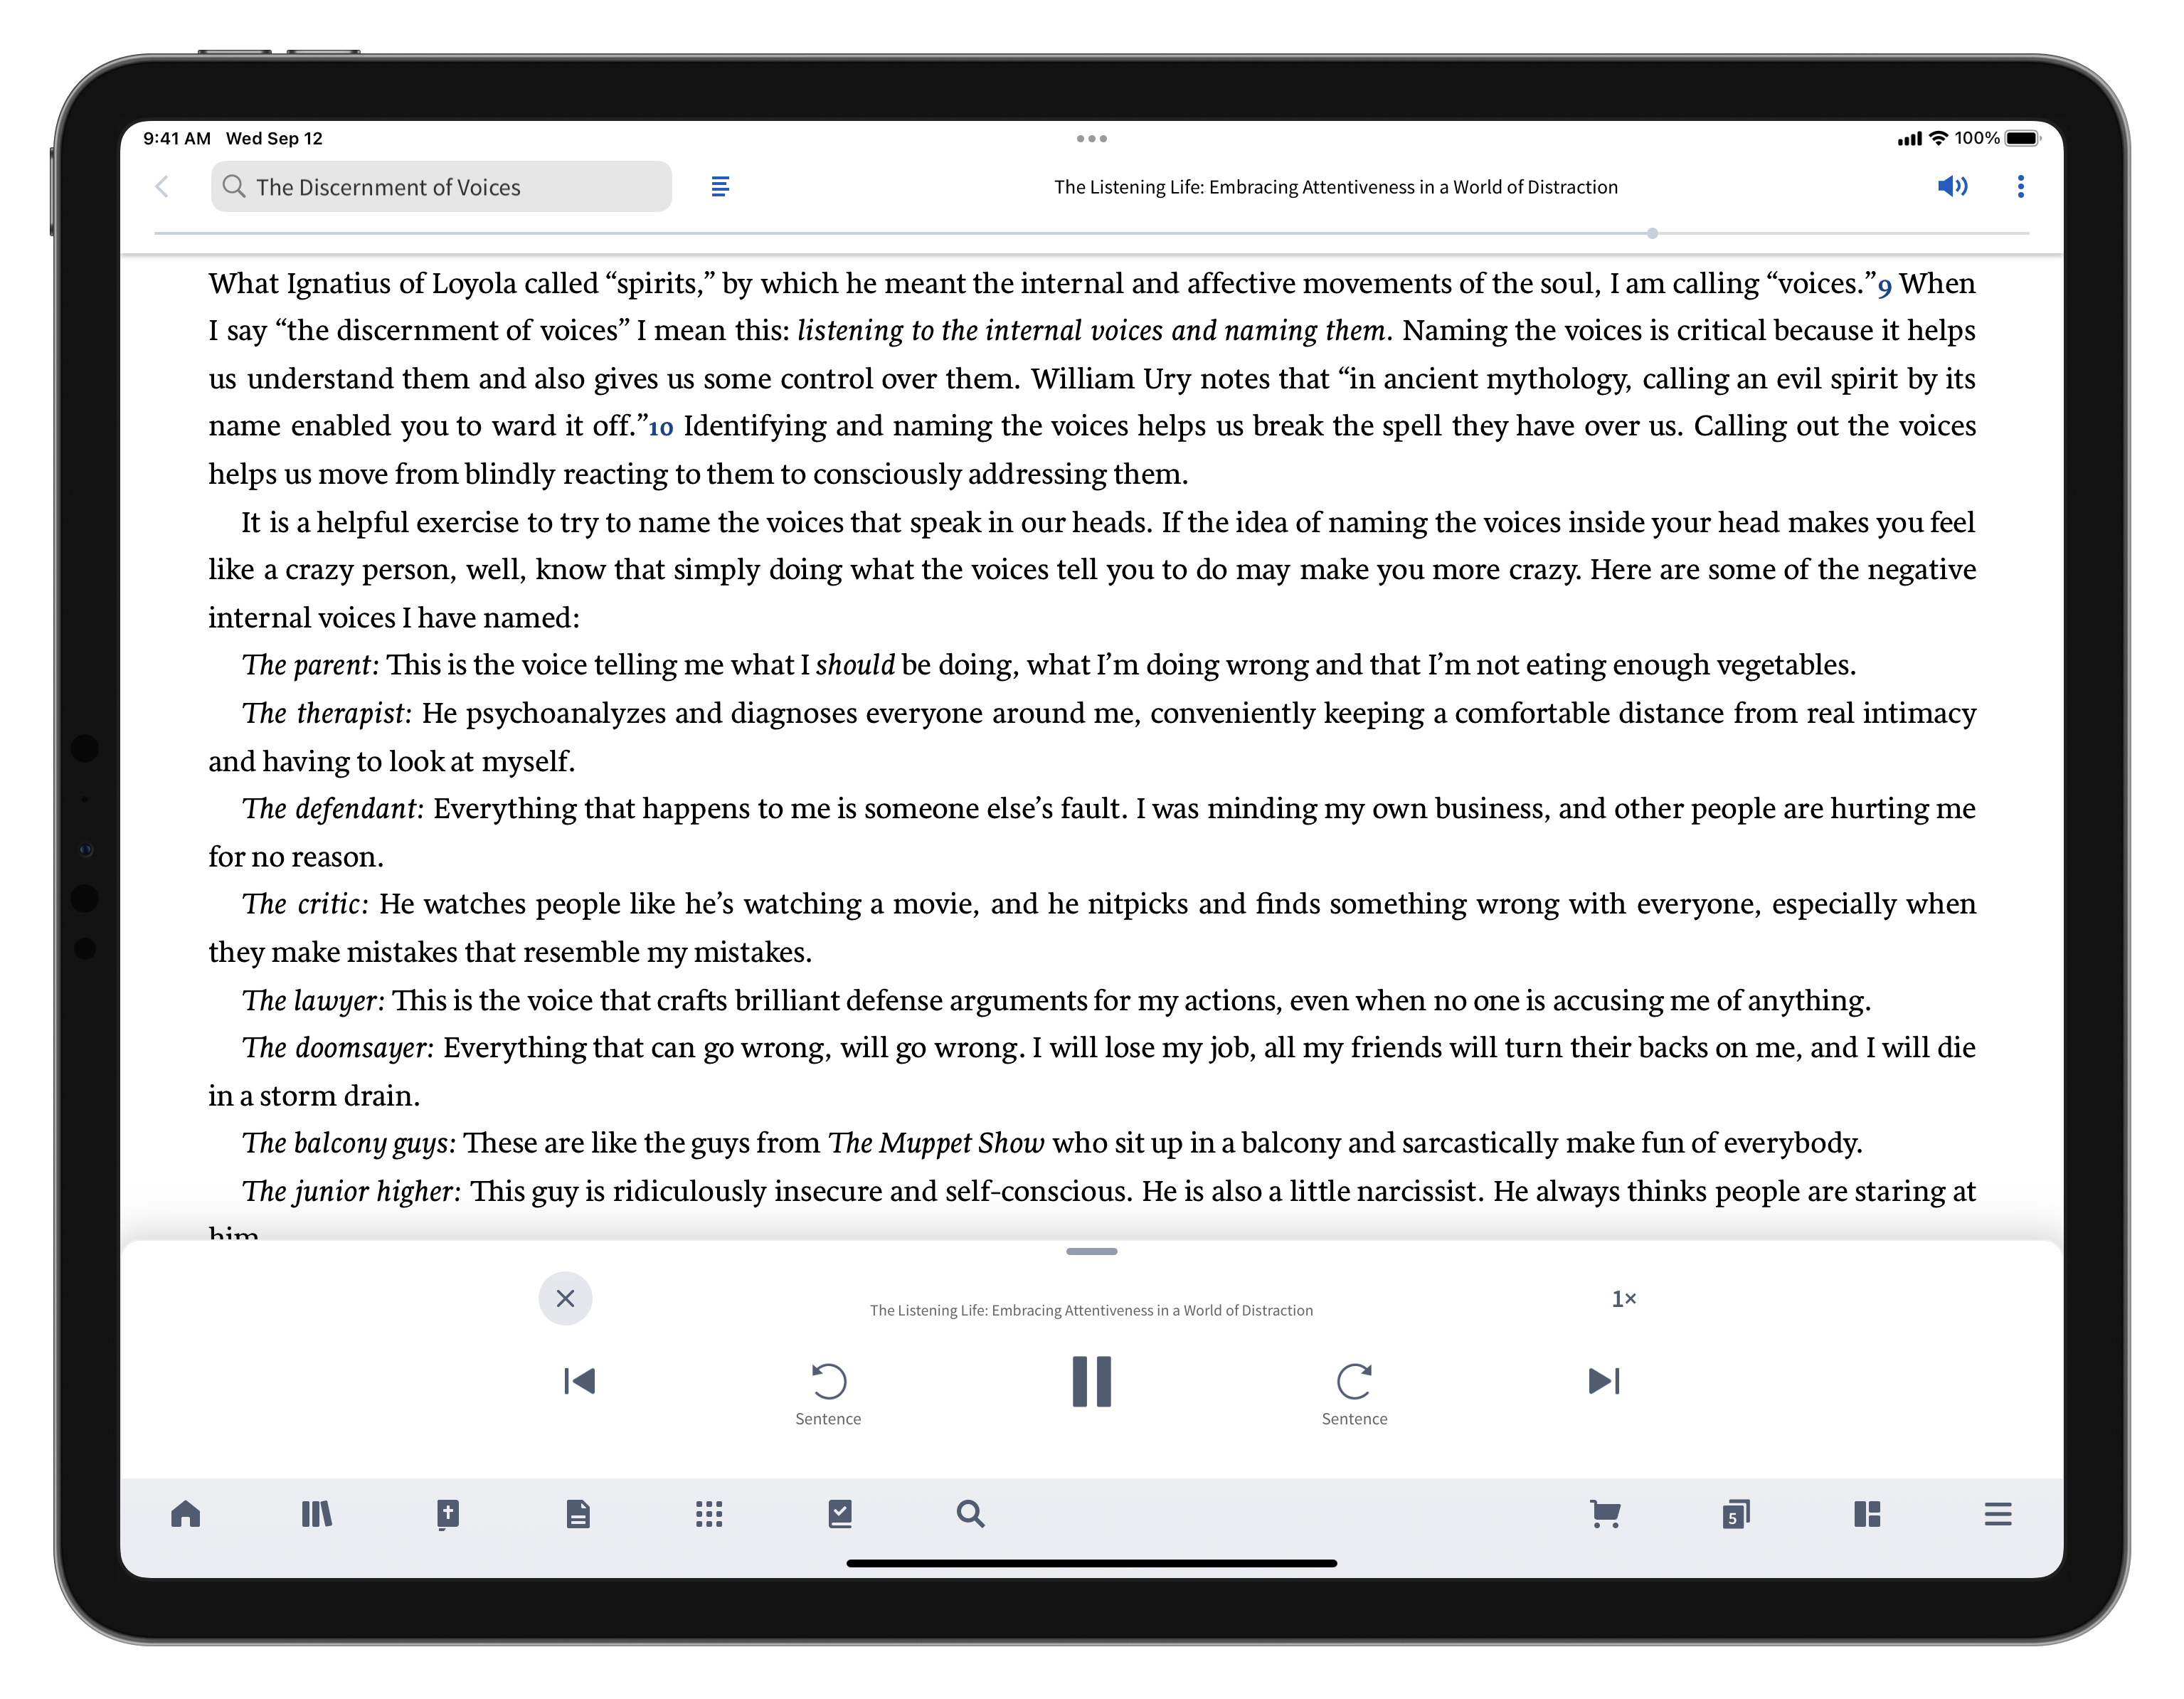 A picture of an iPad with a resource open with the Read Aloud feature working. There is a big pause button toward the bottom of the screen, indicating that the audio is playing.